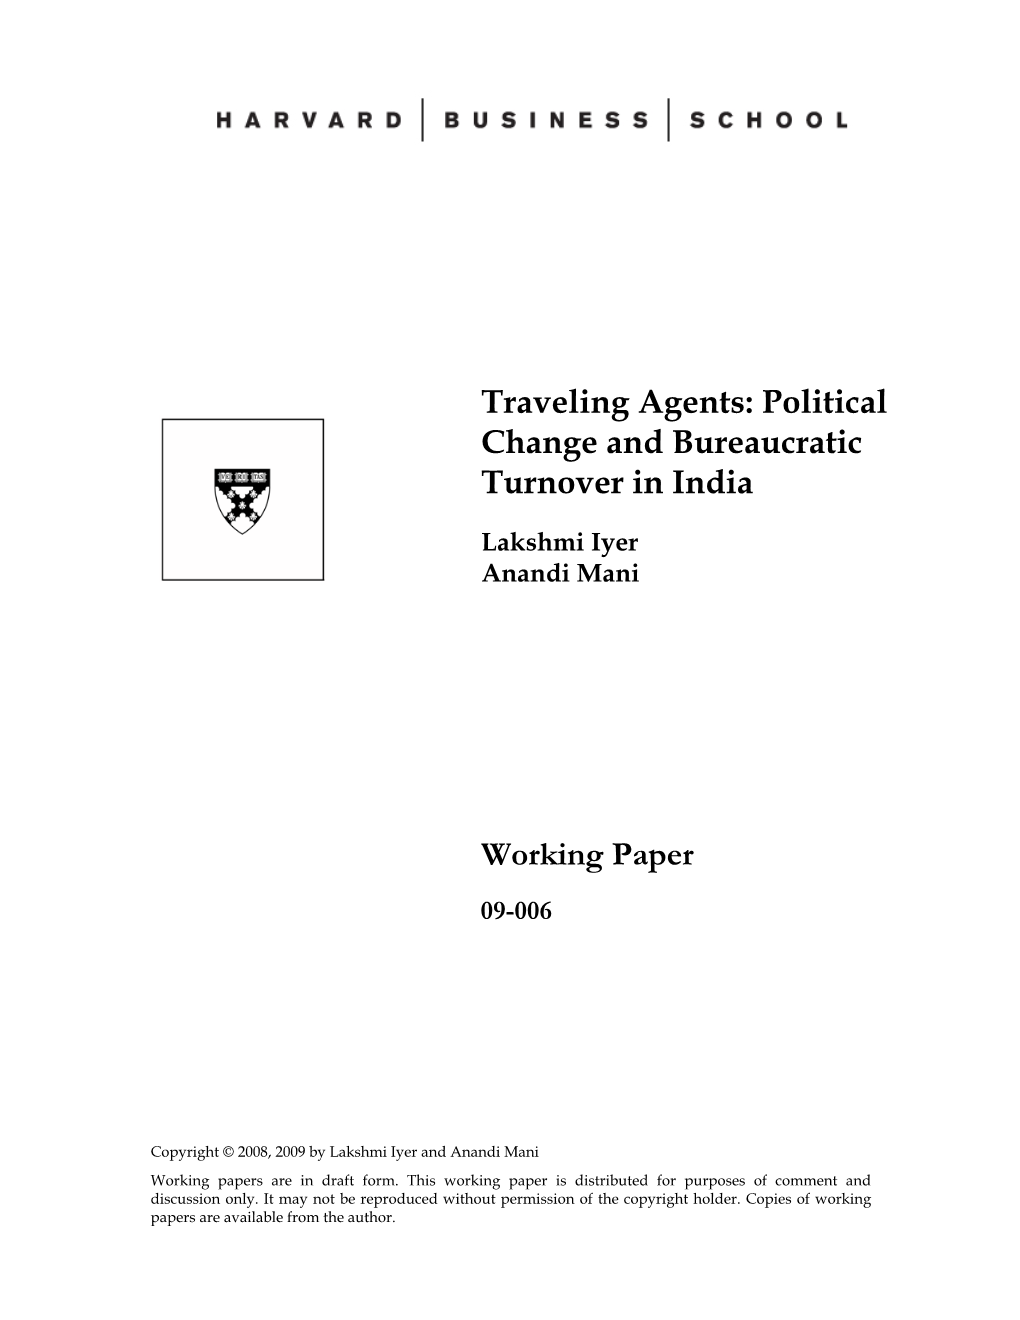 Traveling Agents: Political Change and Bureaucratic Turnover in India